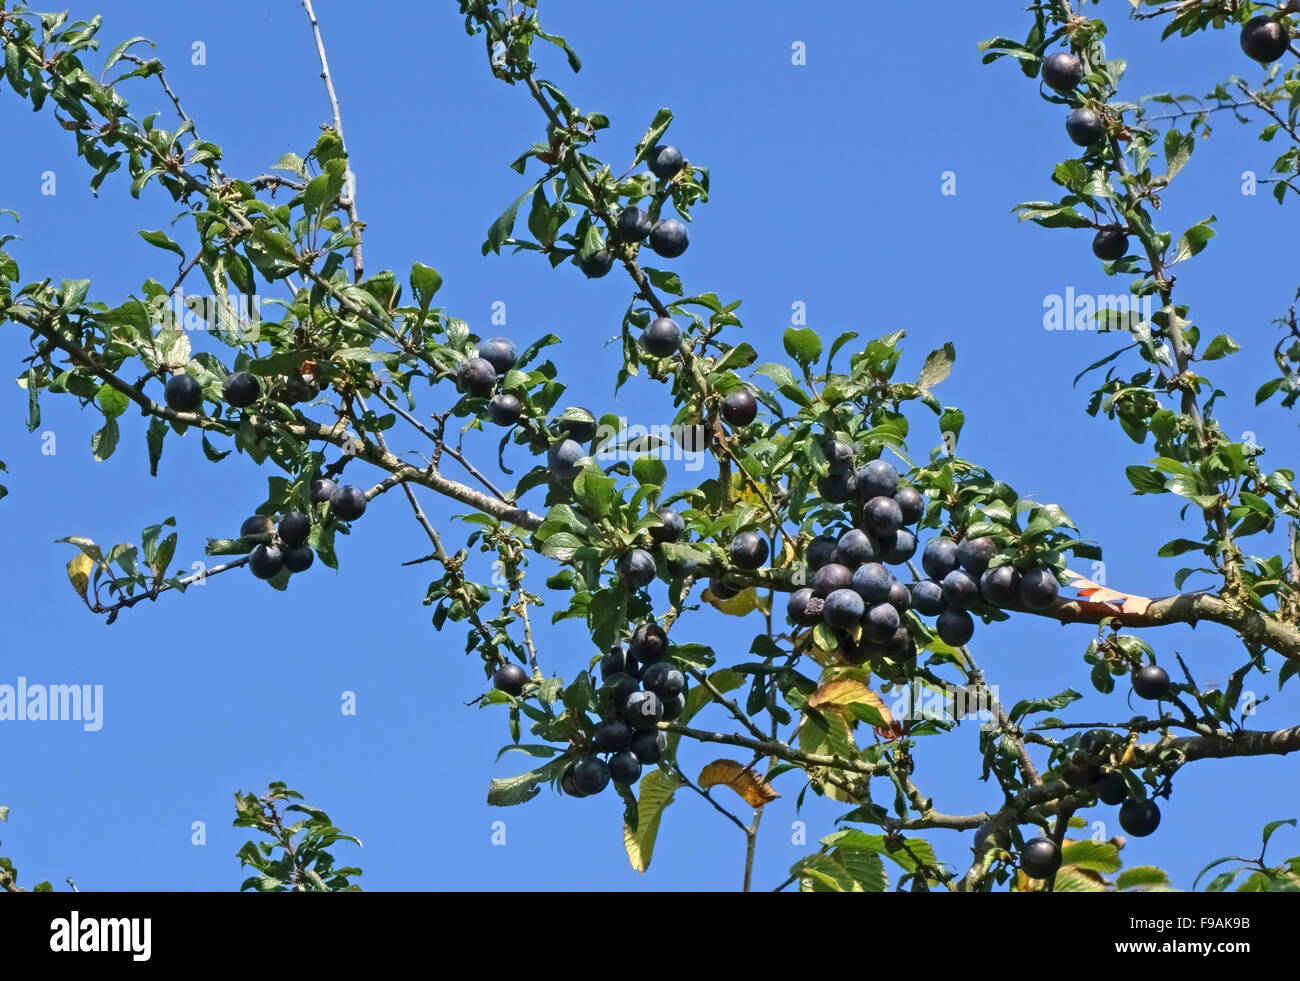 Blackthorn, Prunus spinosa, fruit sloes ripe and ready to harvest in autumn, Berkshire, October Stock Photo